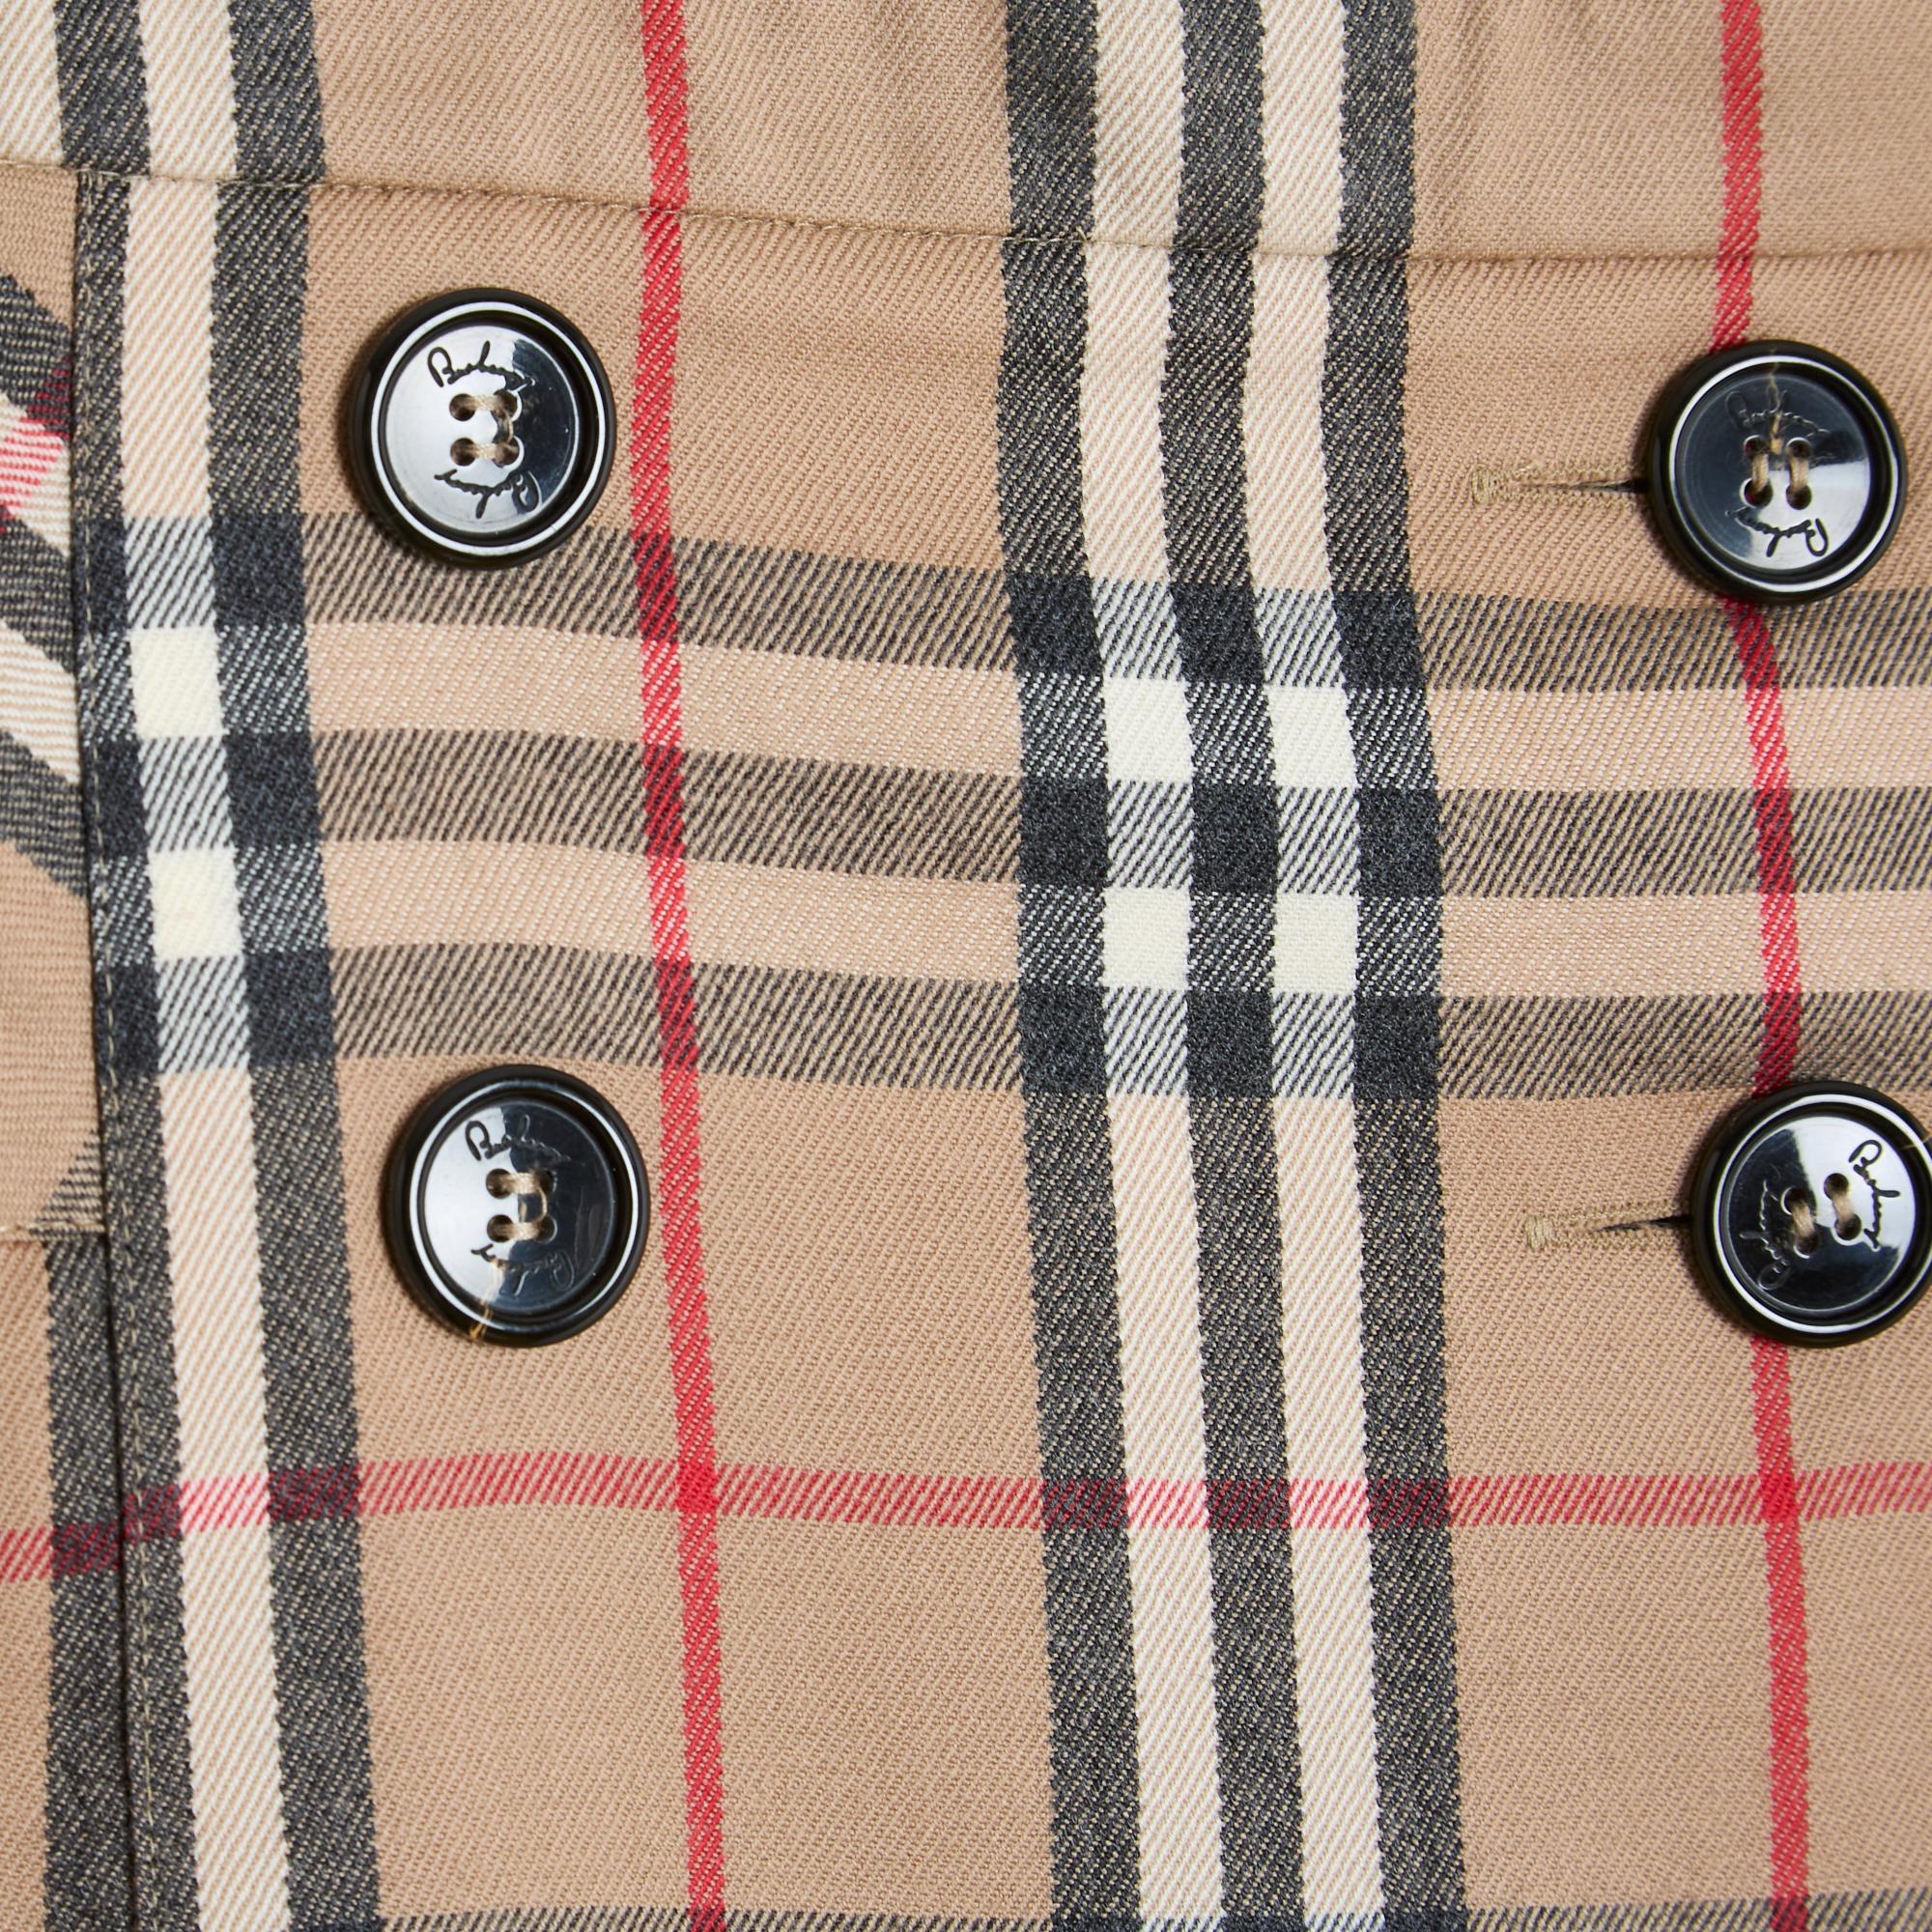 Burberry kilt-style skirt with wrap closure, short pleated wool in Scottish or Vintage Check pattern in camel beige, ecru black tones, low waist, adjustable cross closure with 4 buttons and 2 interior Velcro straps, unlined. Size UK6 and US4 i.e.